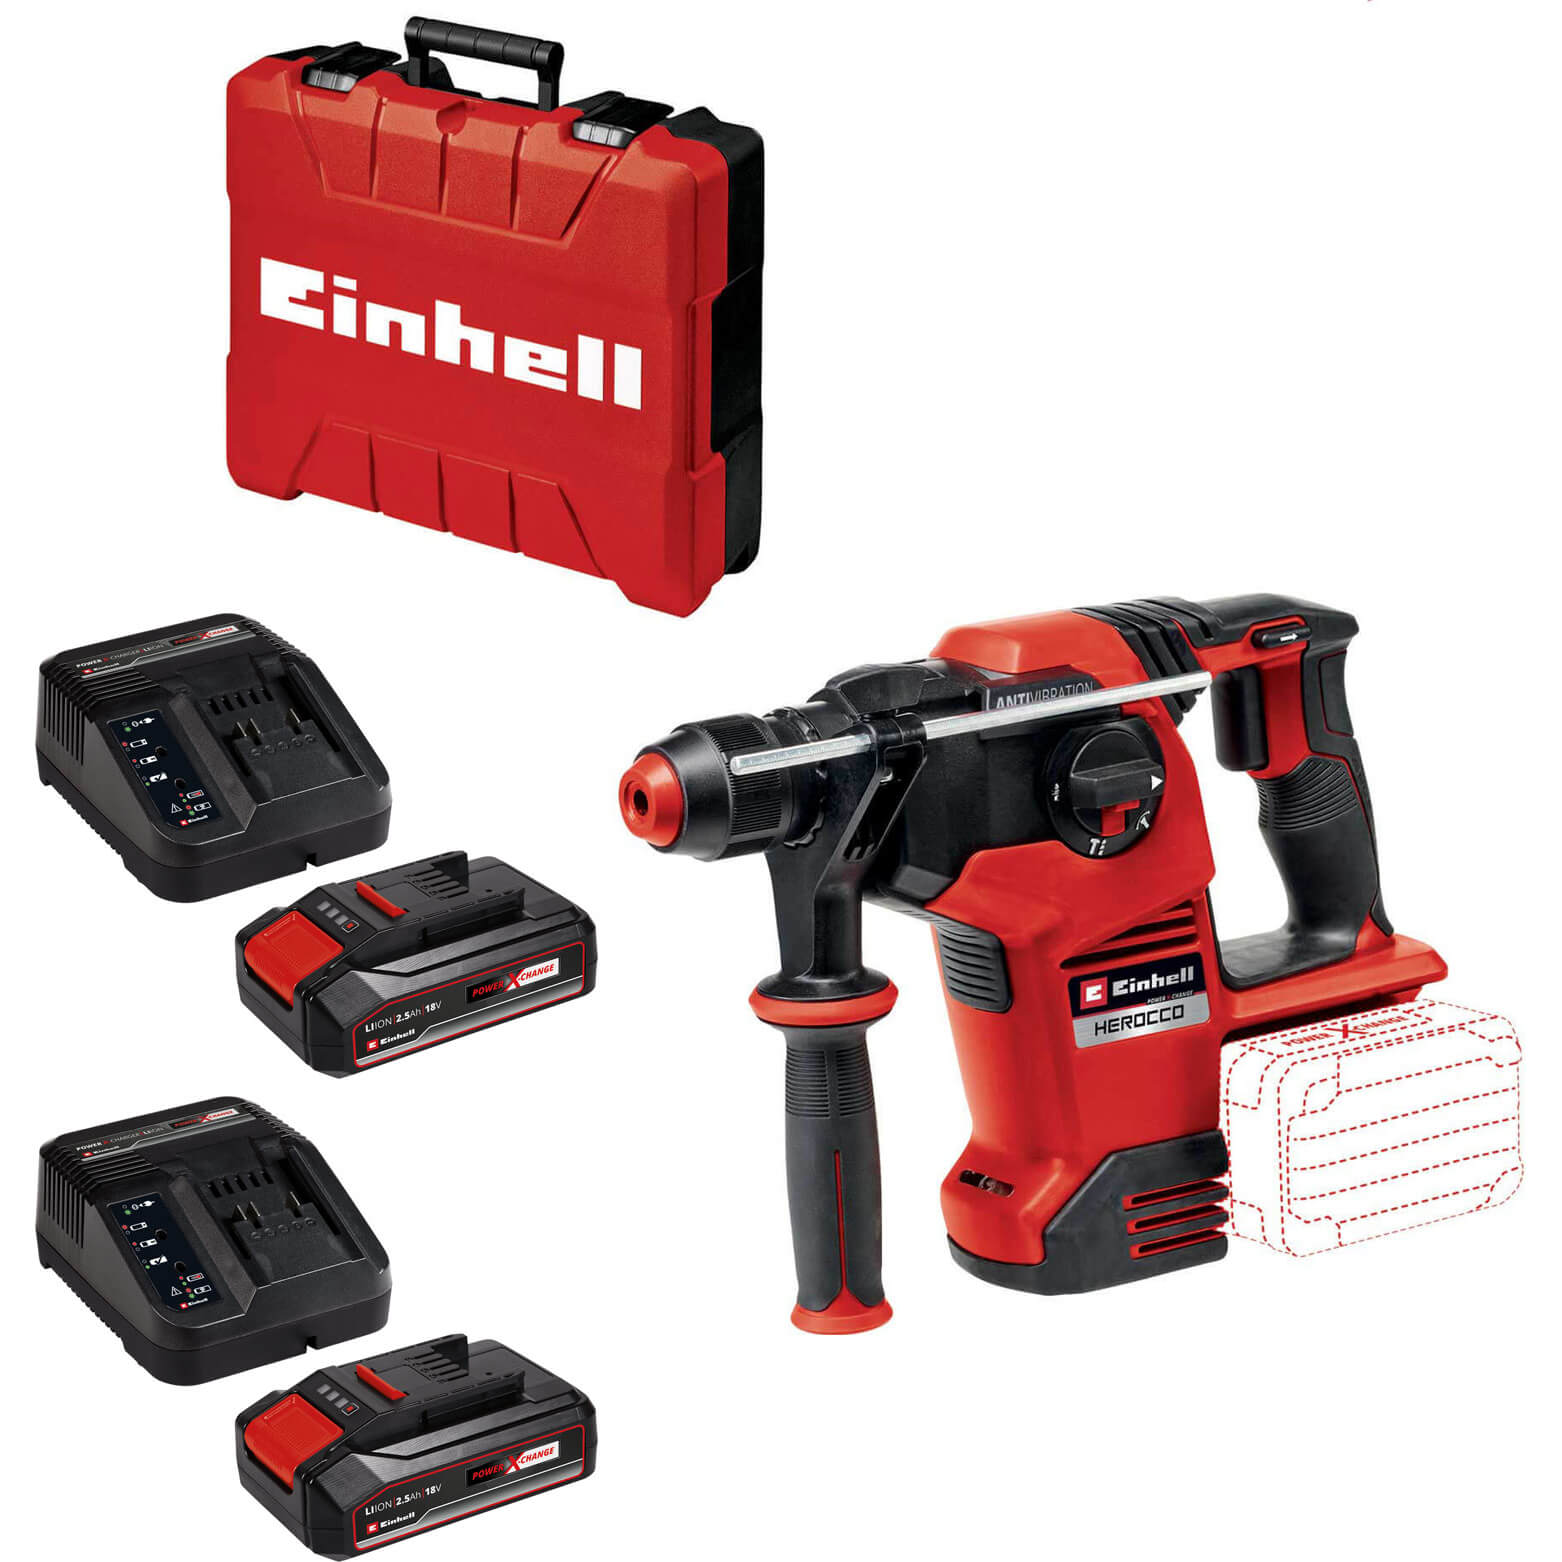 Image of Einhell HEROCCO 36/28 36v Cordless Brushless SDS Plus Rotary Hammer Drill 2 x 2.5ah Li-ion Charger Case